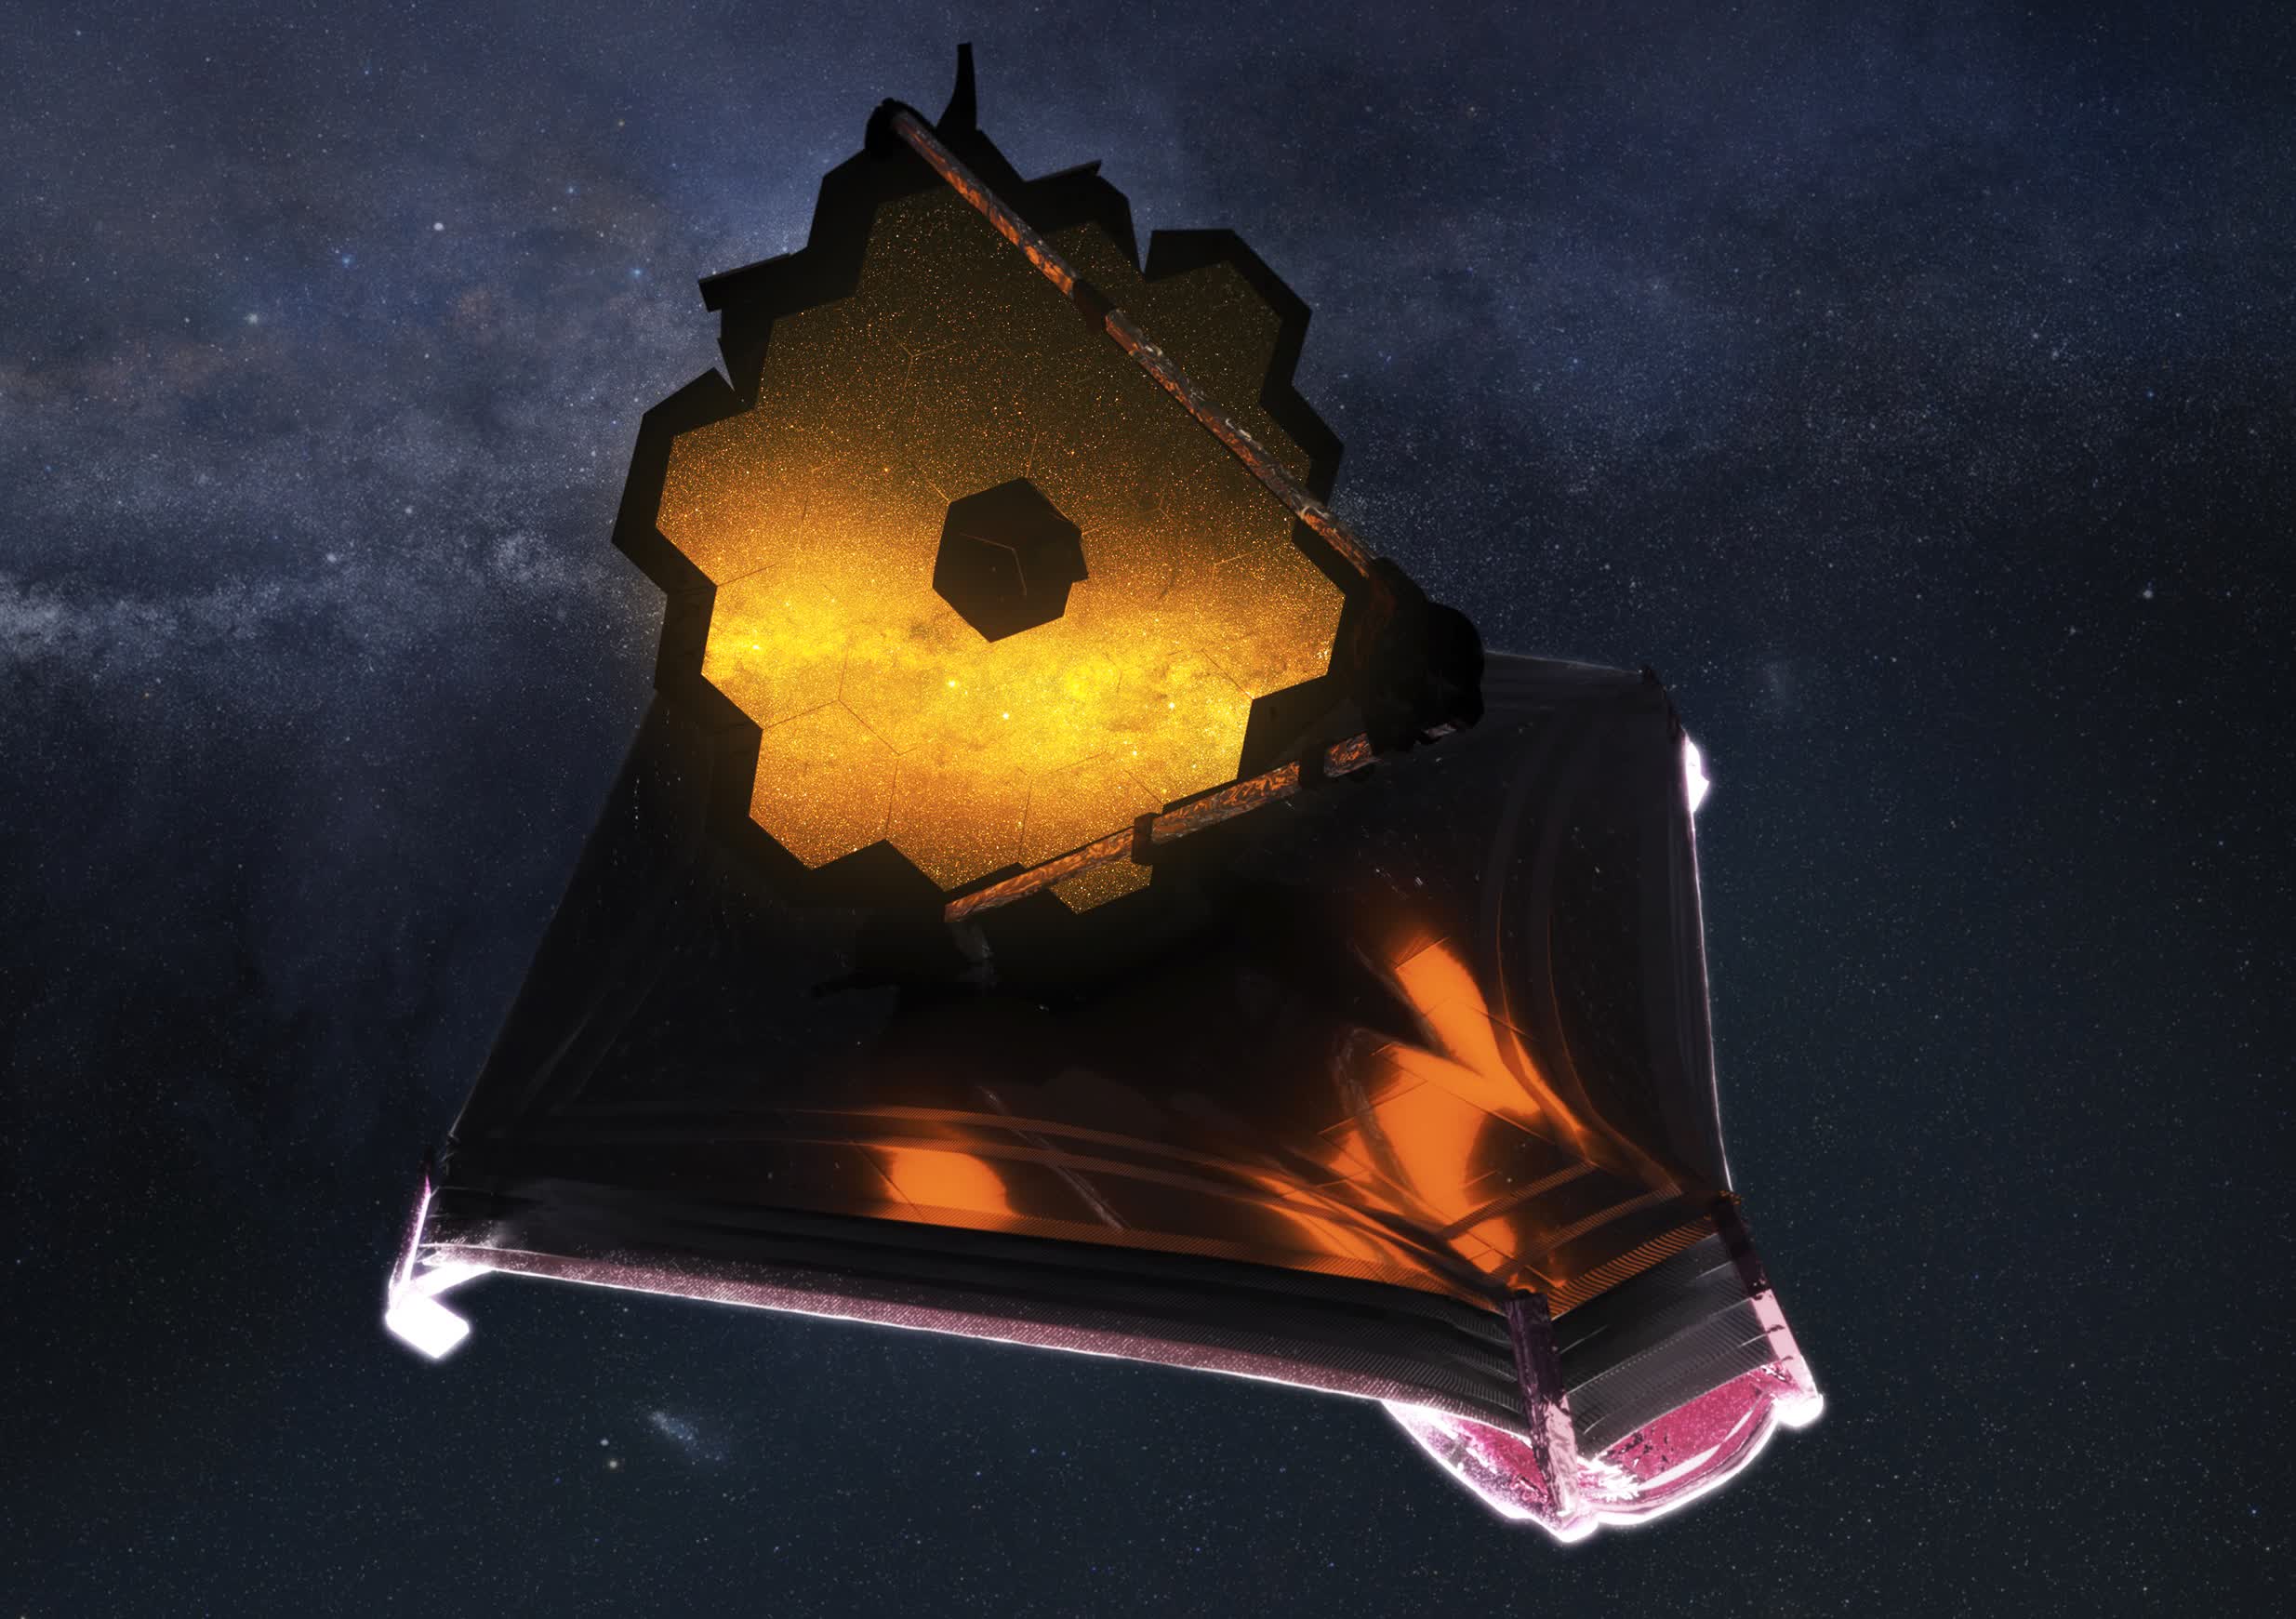 James Webb Space Telescope launch delayed for the umpteenth time